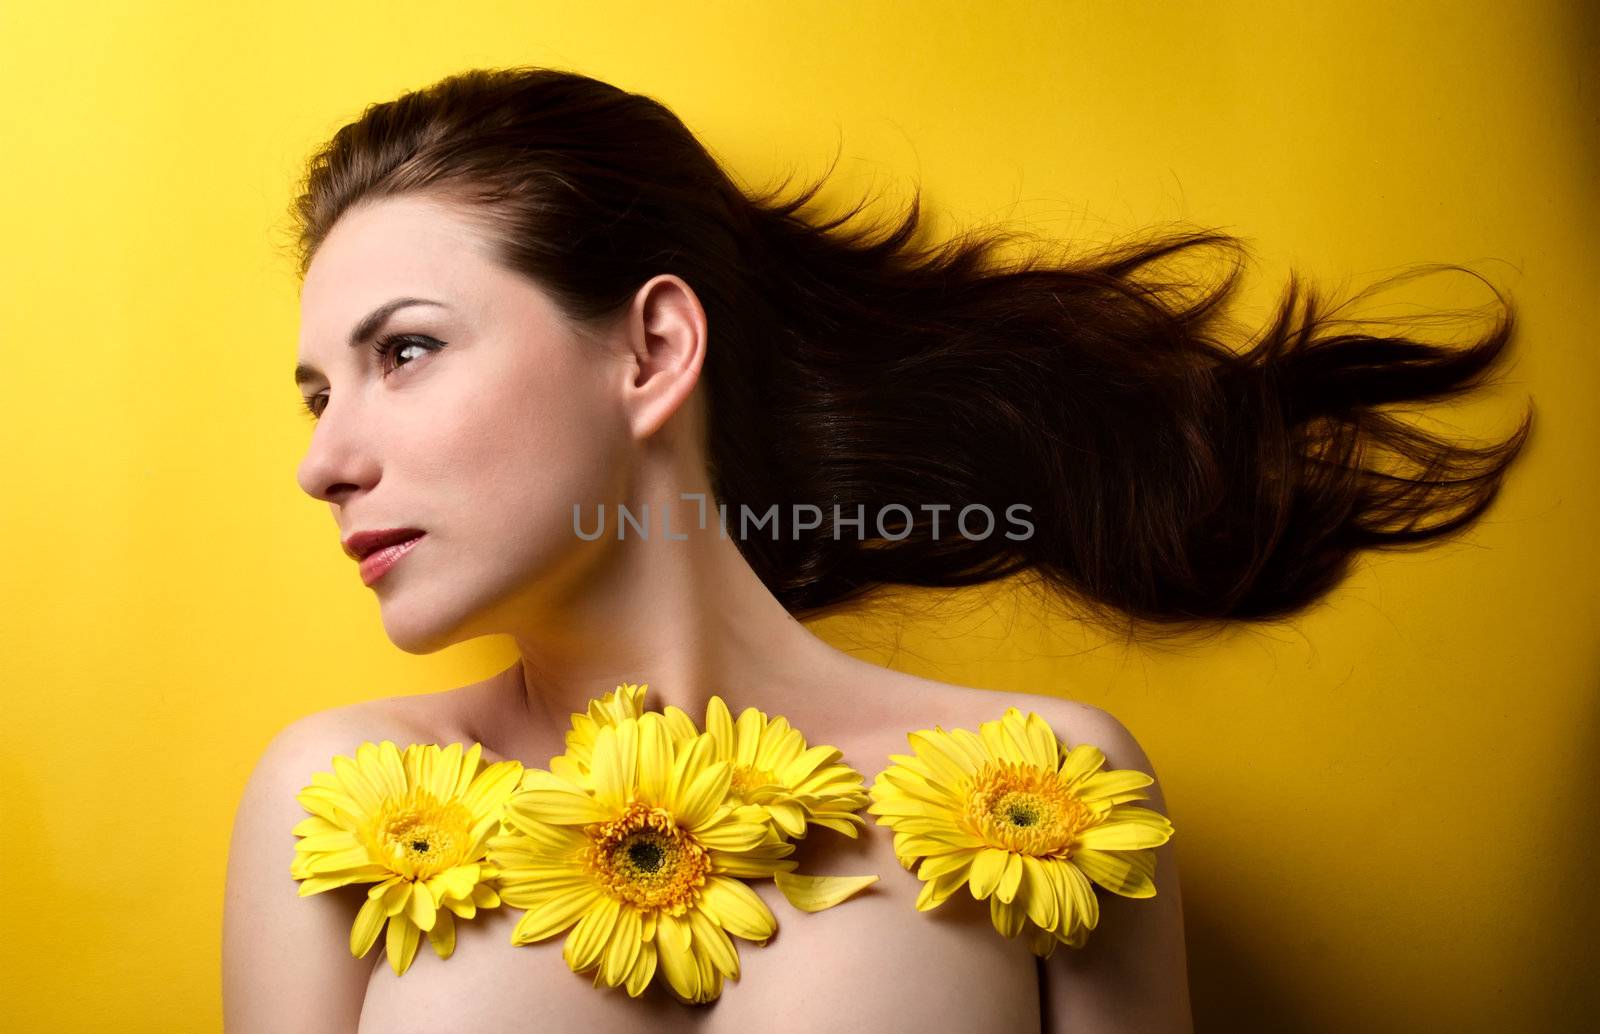 Topless woman covered with flowers by kirs-ua